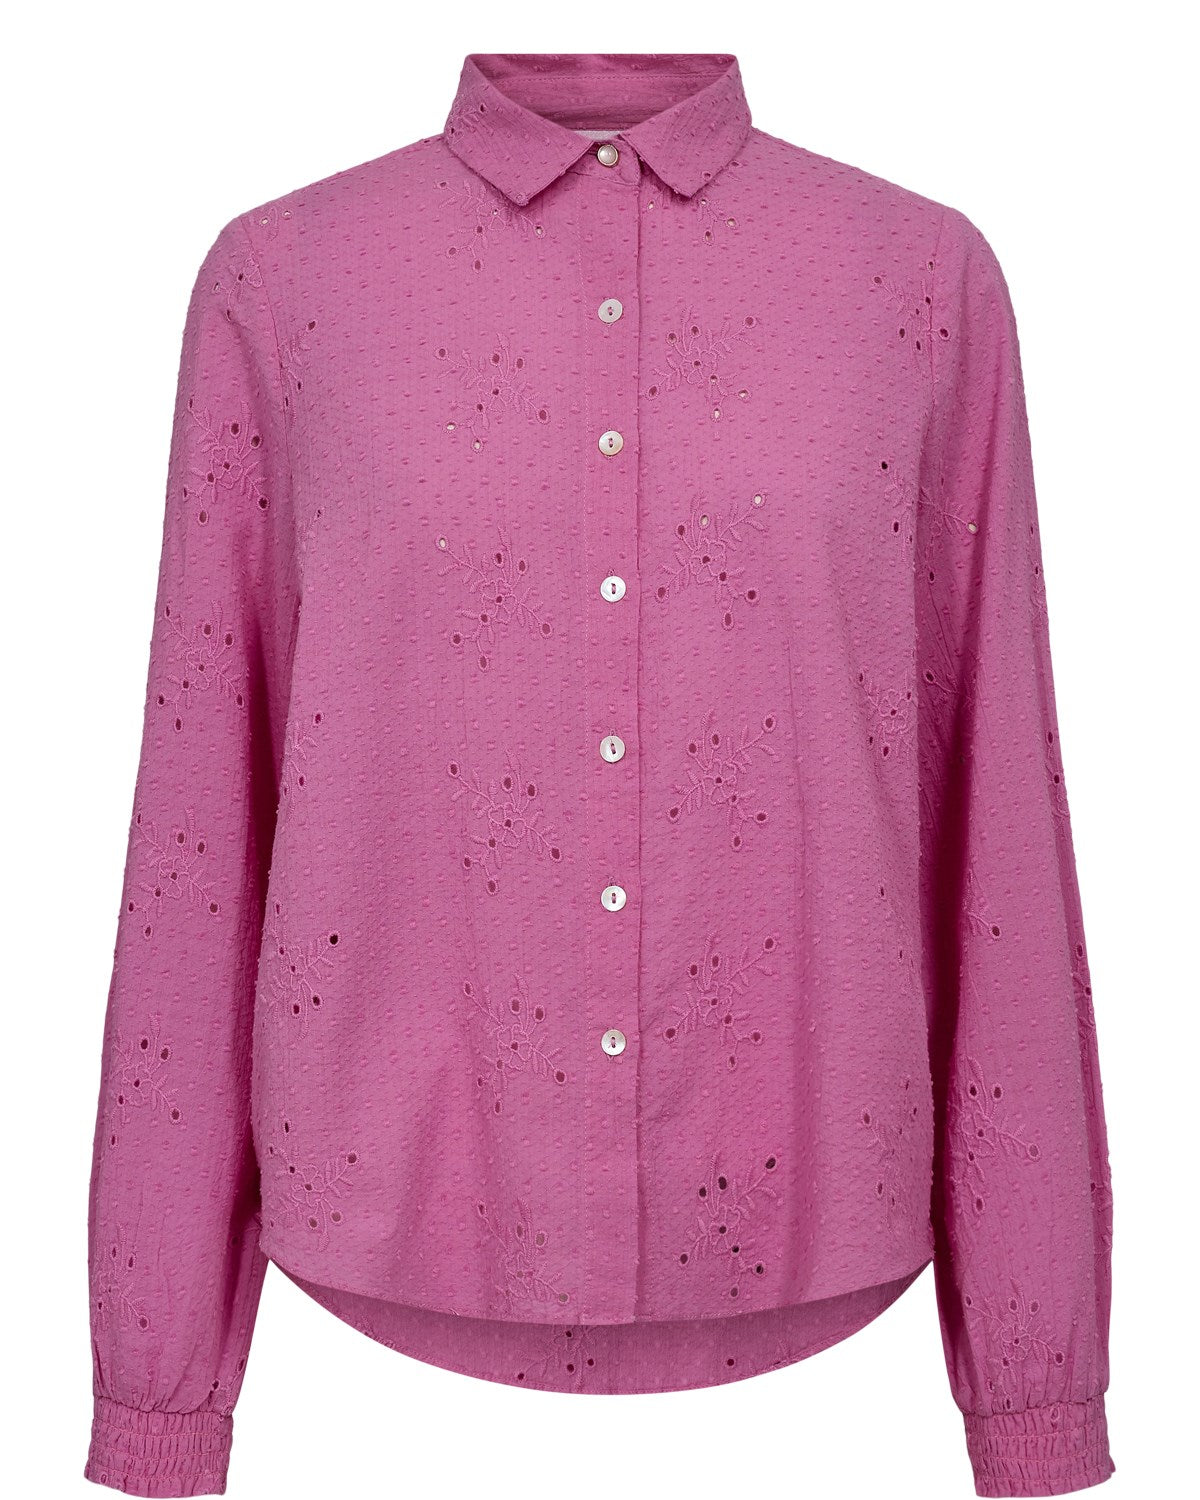 Shirts ⇒ See our selection of stylish shirts for women| NÜMPH